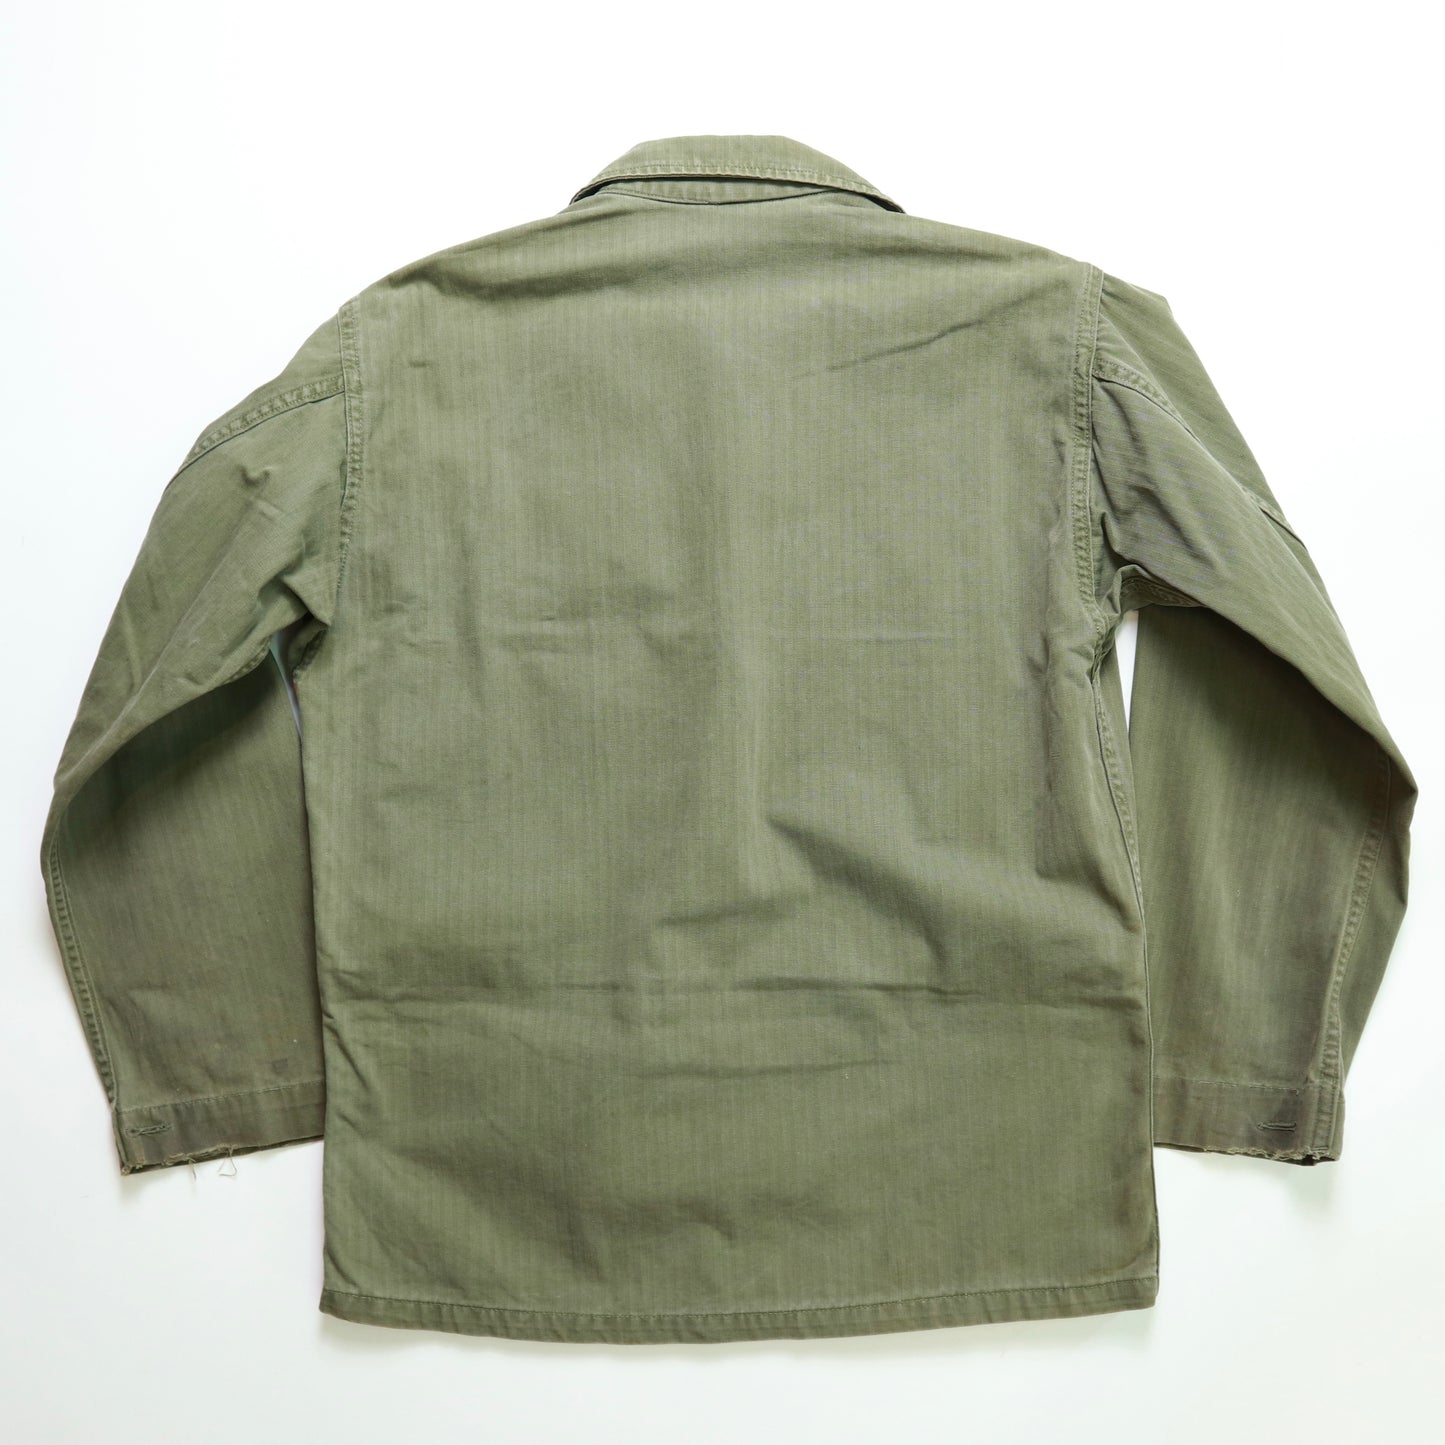 1940s WWII US ARMY M43 HBT Jacket/2nd Pattern/13 Star